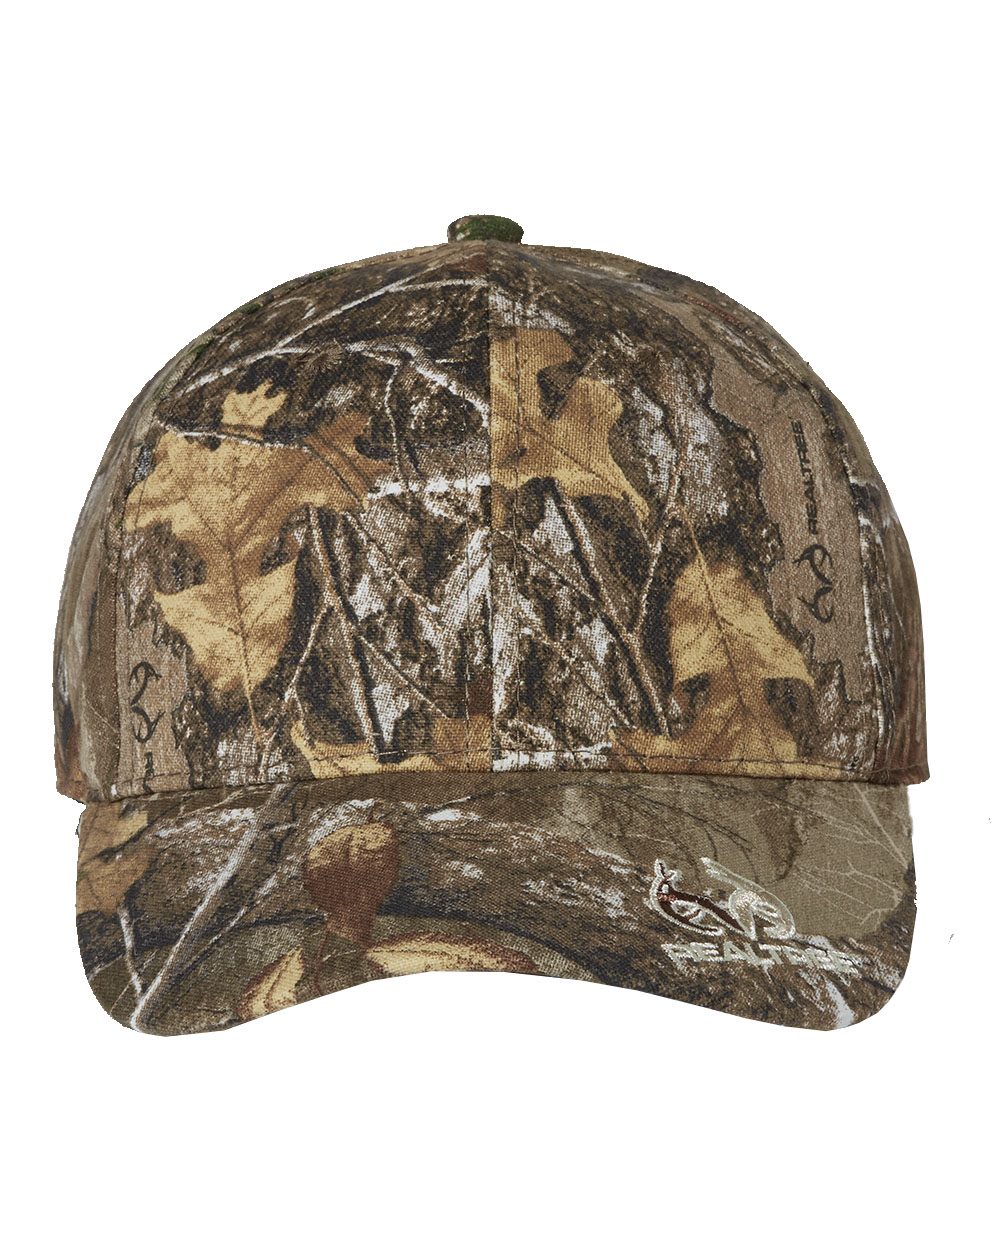 Hunting Headwear - Official Licensed Realtree Camouflage Outdoor Sun Cap Hat